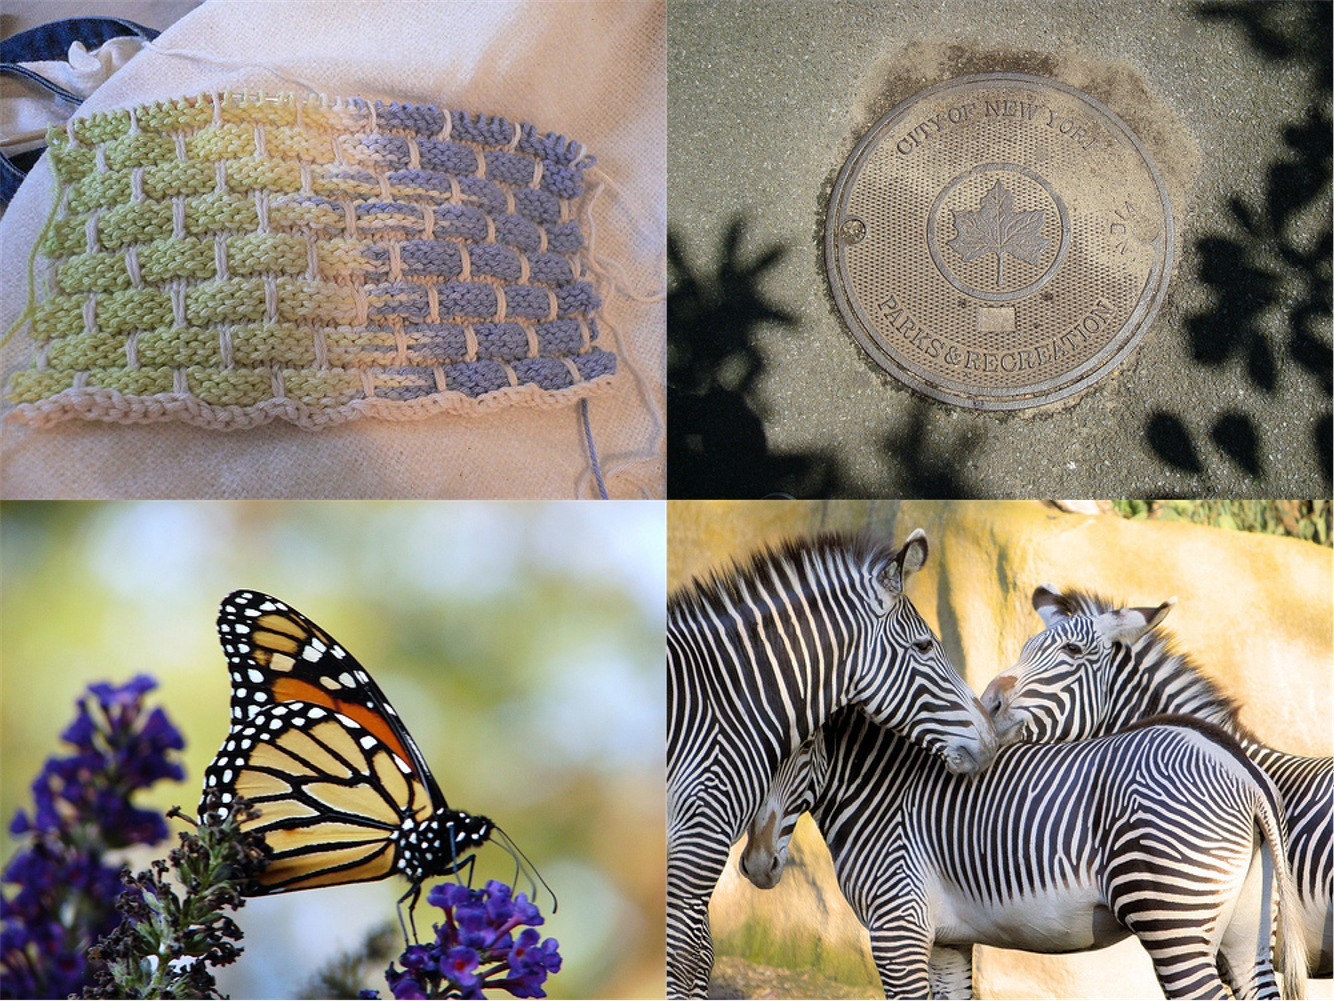 The hardest categories to modify. ImageNet images clockwise from top left: dishrag, manhole cover, zebra, monarch butterfly.